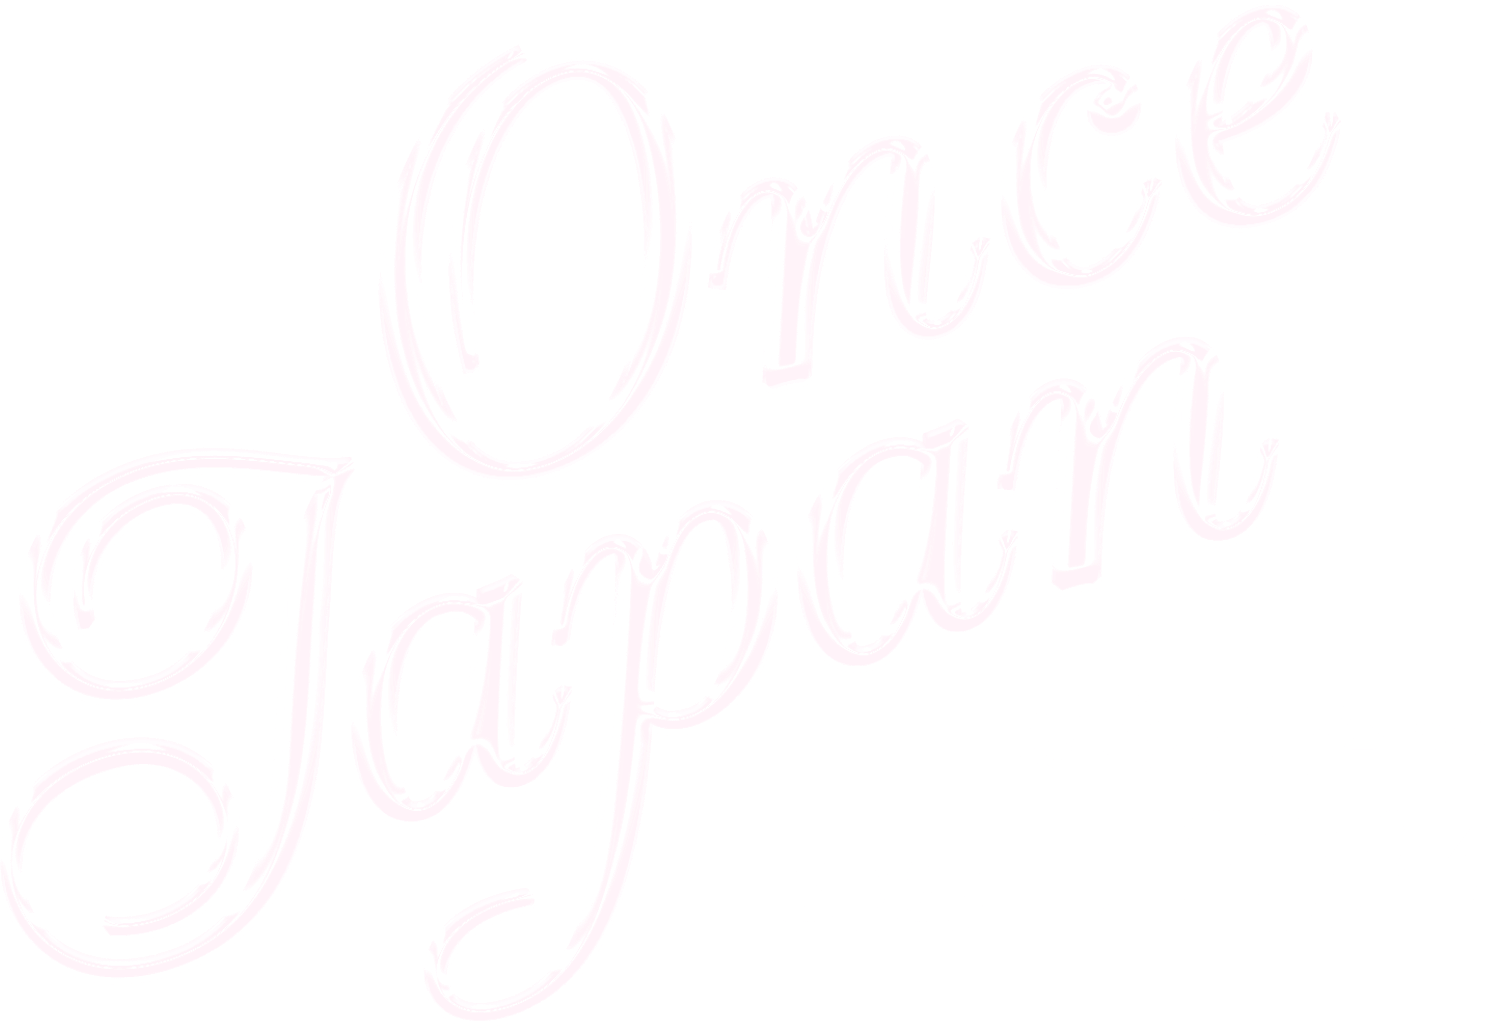 ONCE JAPAN お年玉企画 2023 → 2024